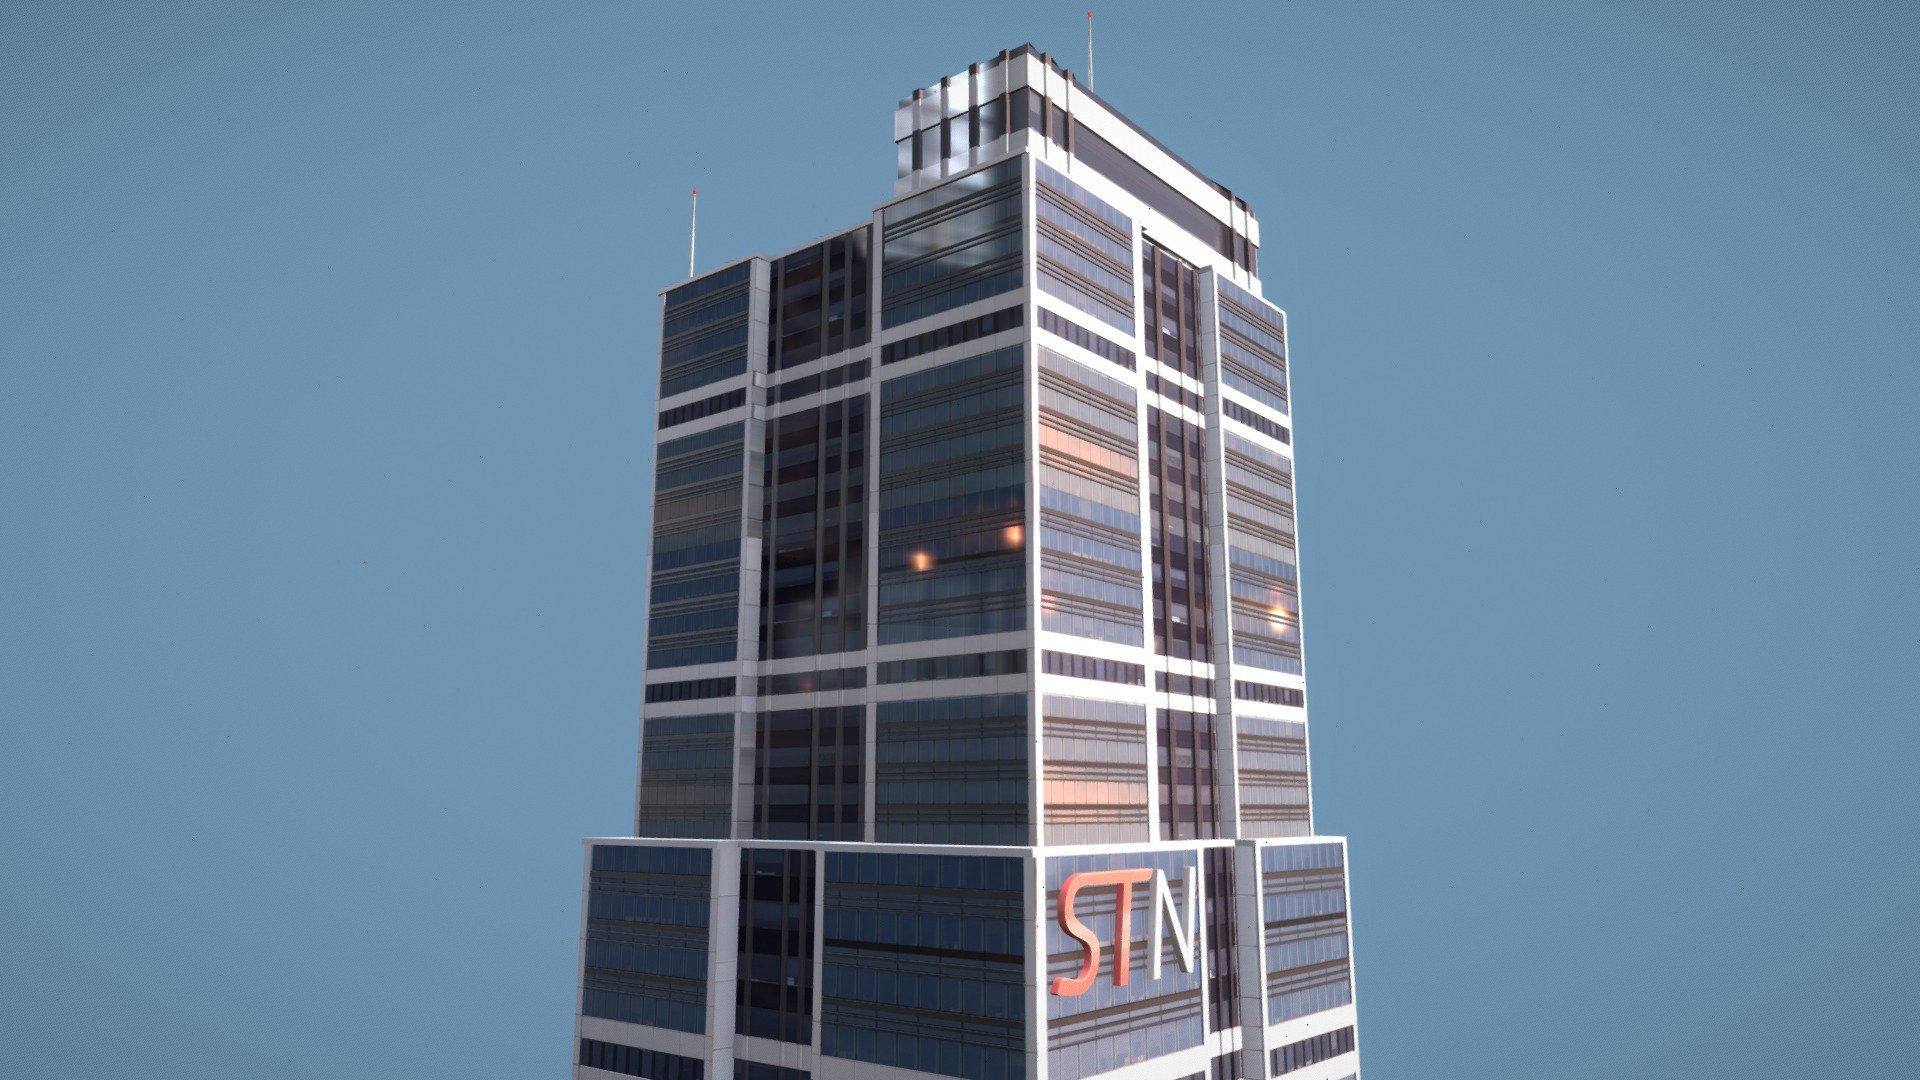 High rise city  builduing in a stylized anime style
It's supossed to be a Tv-Station but can be used for various other purposes like highrise offices - Stylized Highrise City Building TV Station - Download Free 3D model by Taenshi 3d model